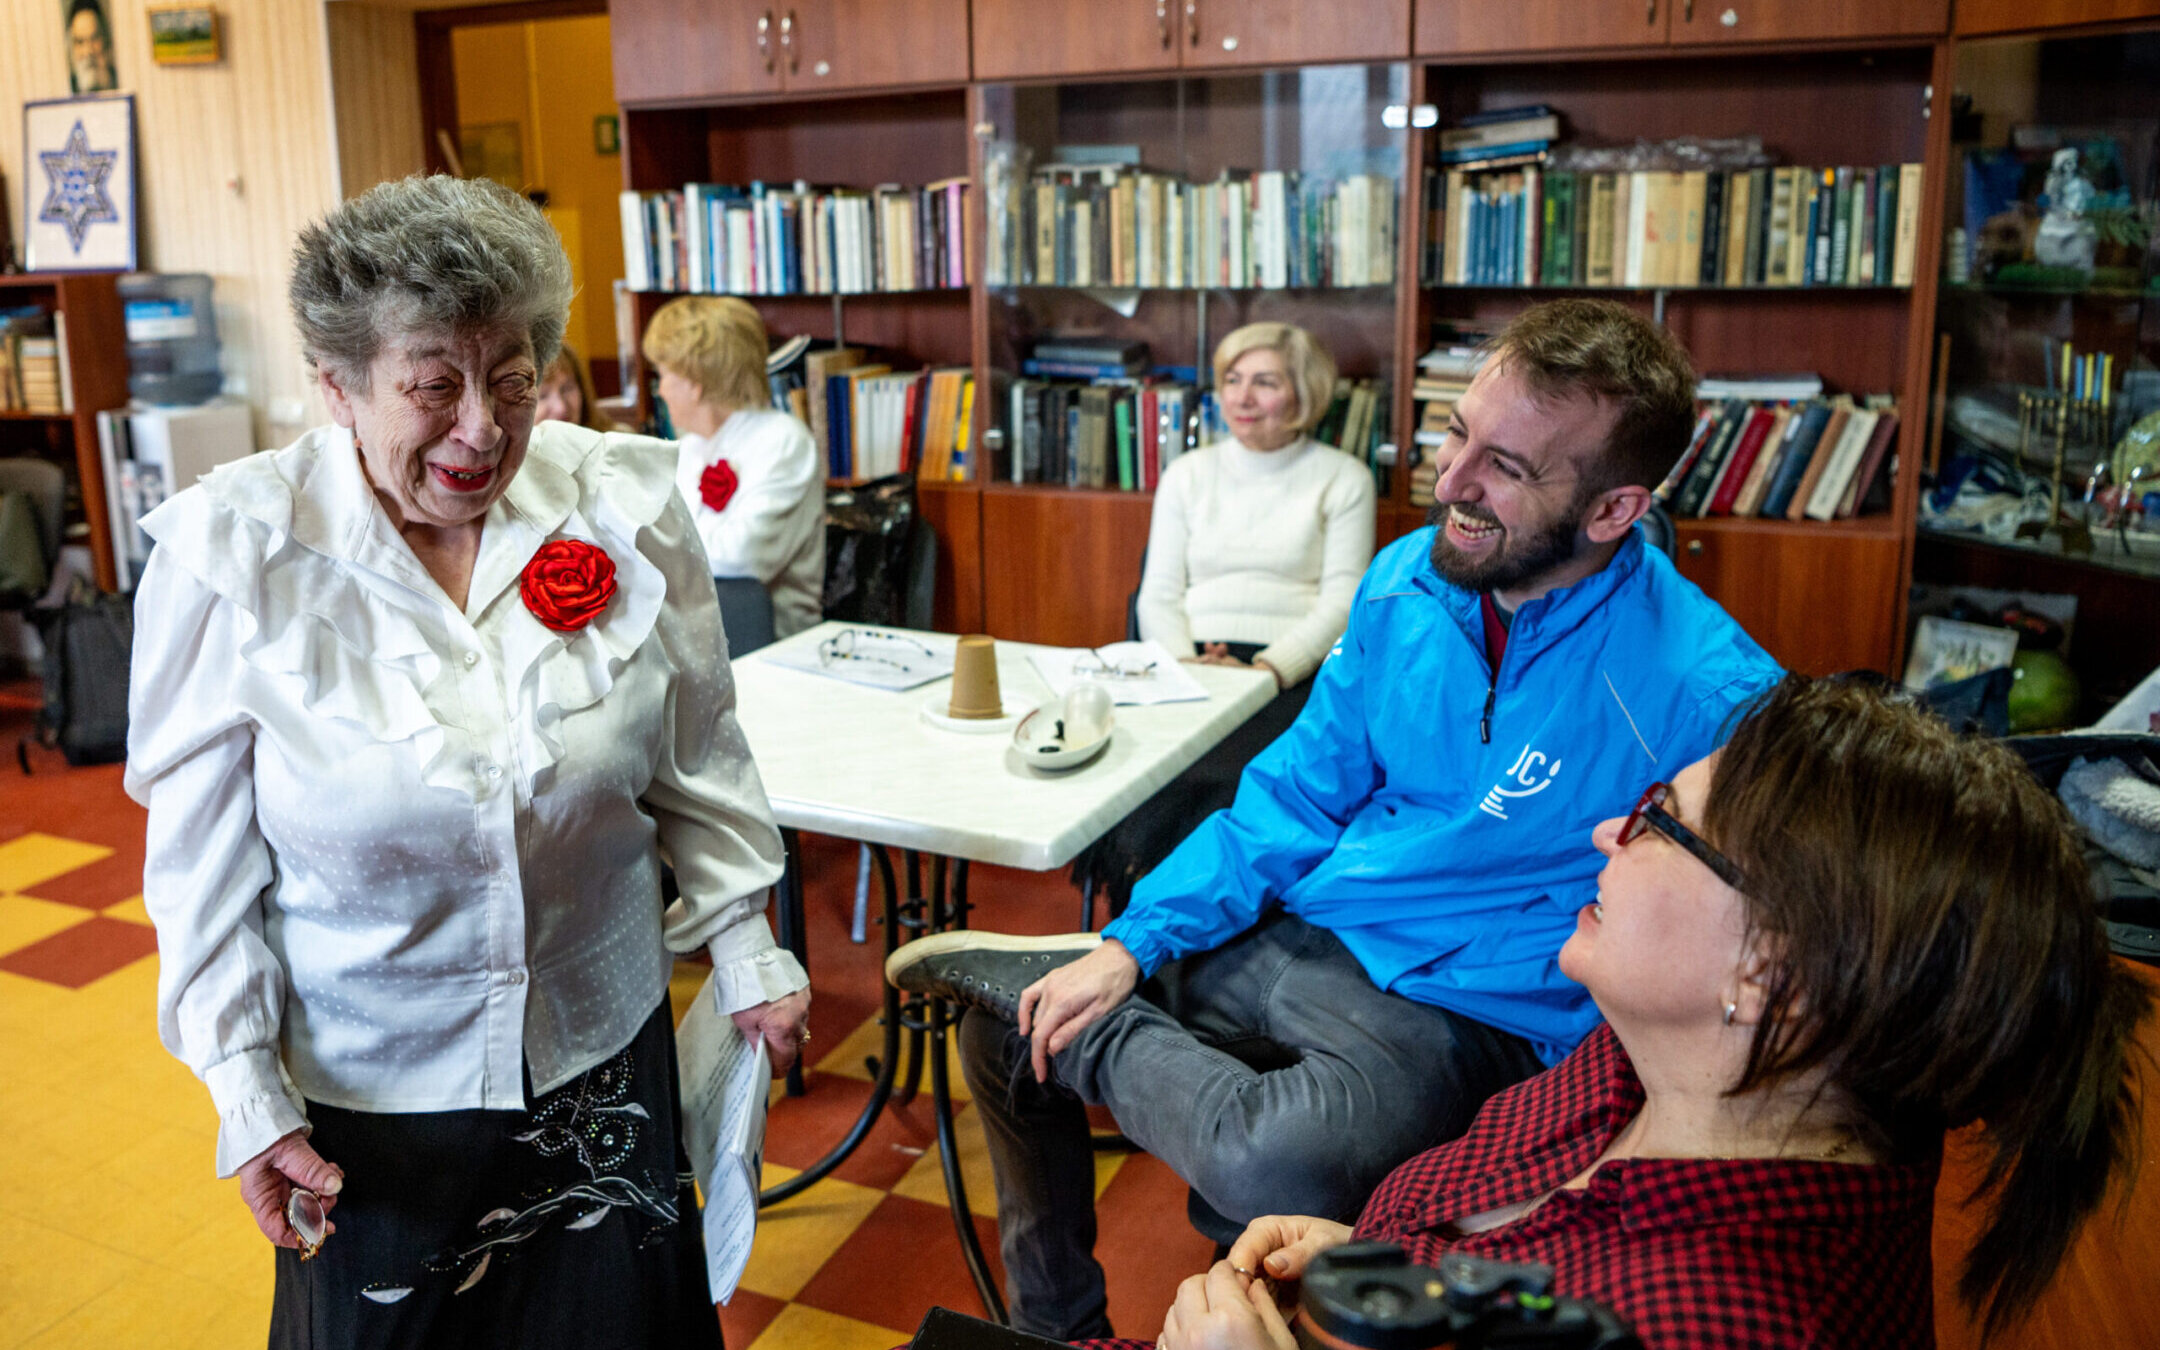 The author (center, in blue) visits with members of the Jewish choir at the American Jewish Joint Distribution Committee’s Hesed social service center in Odesa, Ukraine. They have continued their singing despite the ongoing war. (Arik Shraga)